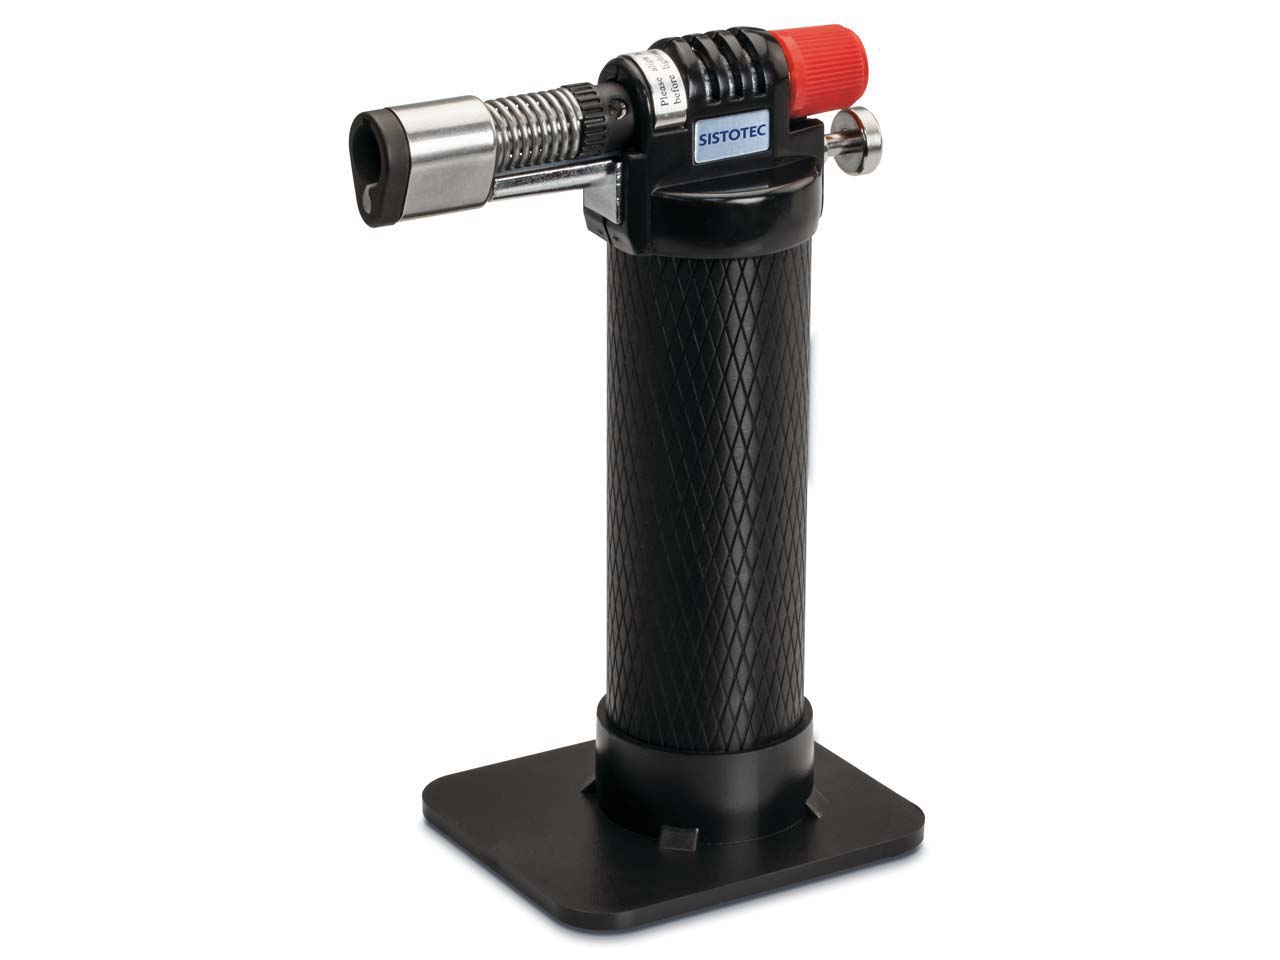 Jewellers Soldering Hand Torch Butane Blow Torch Questions & Answers